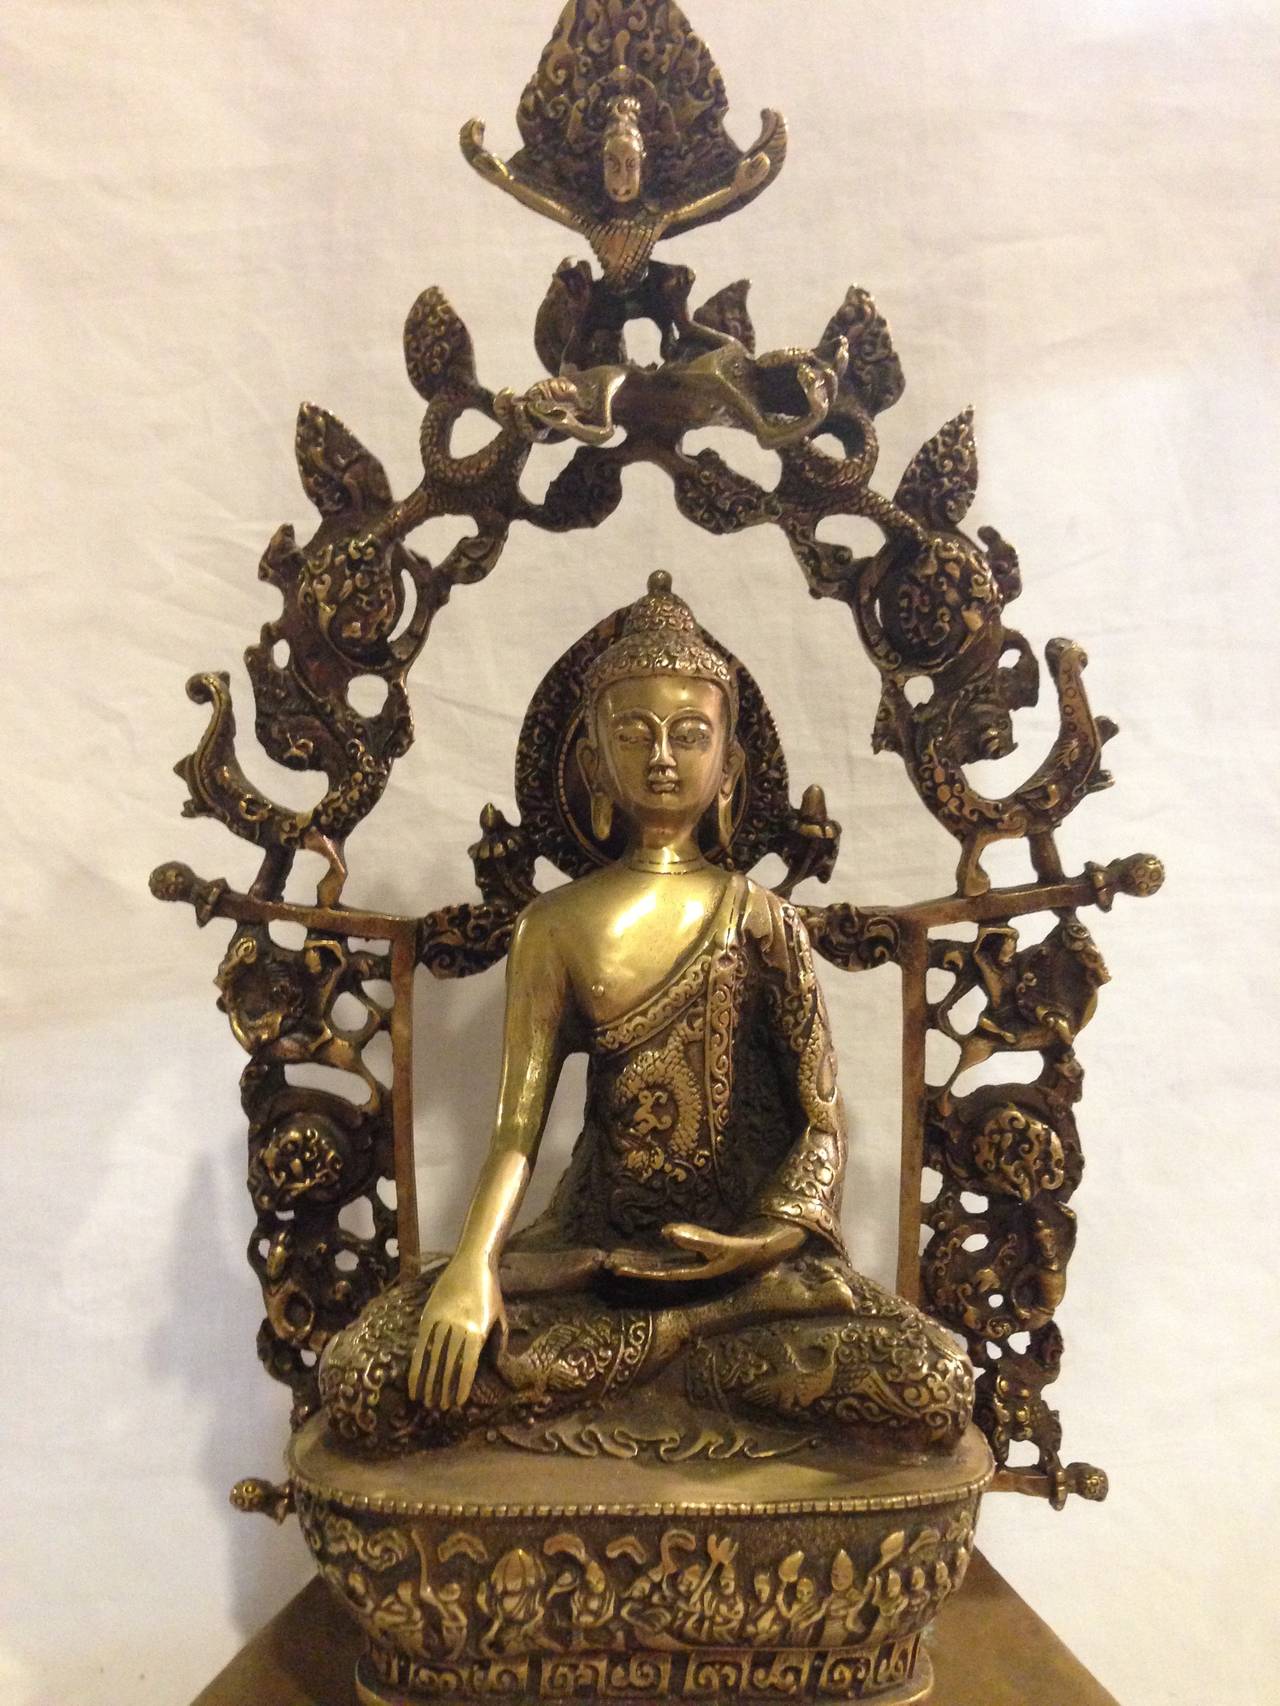 This amazing piece features Buddha in the exotic Silk Road Style. Consisting 3 separate components, each elaborately adorned, no details were overlooked. The main statue is seated on a fully decorated throne with griffins, lotus wheel, eternity